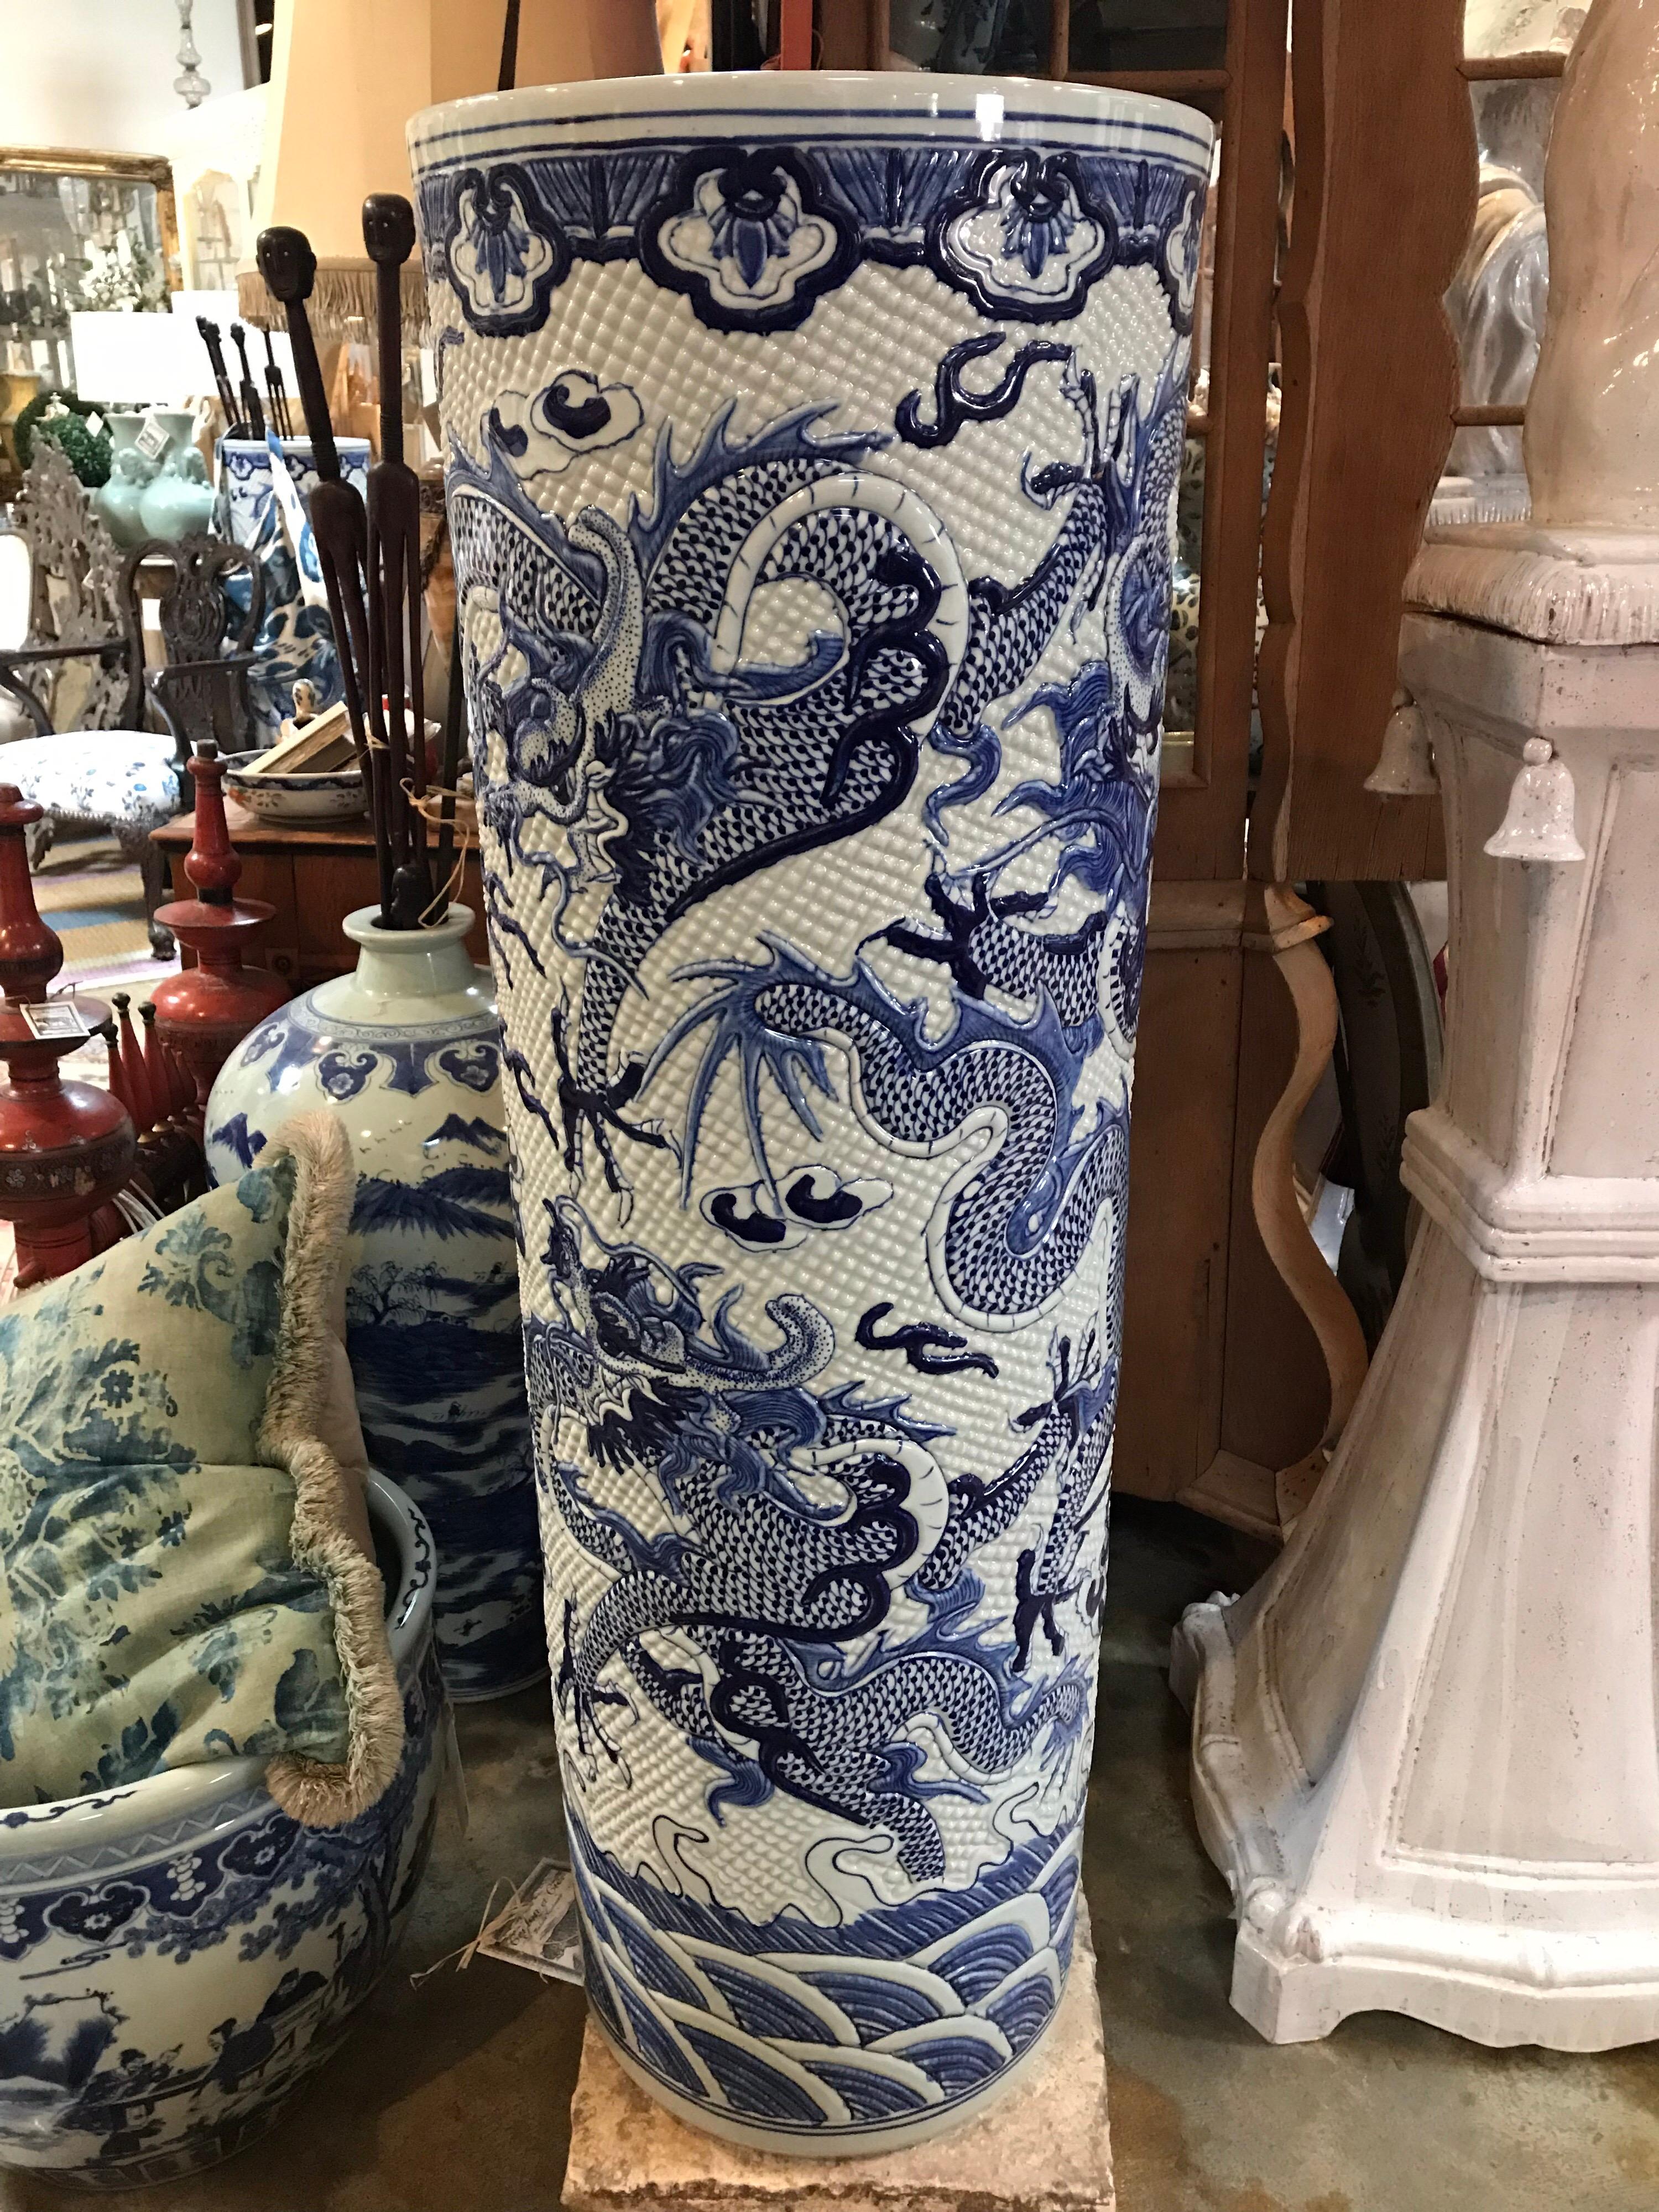 Pair of oversized Chinese cylindrical vases. Beautifully detailed ceramic jars with blue and white dragons. Textured surface. Over scaled for visual importance.